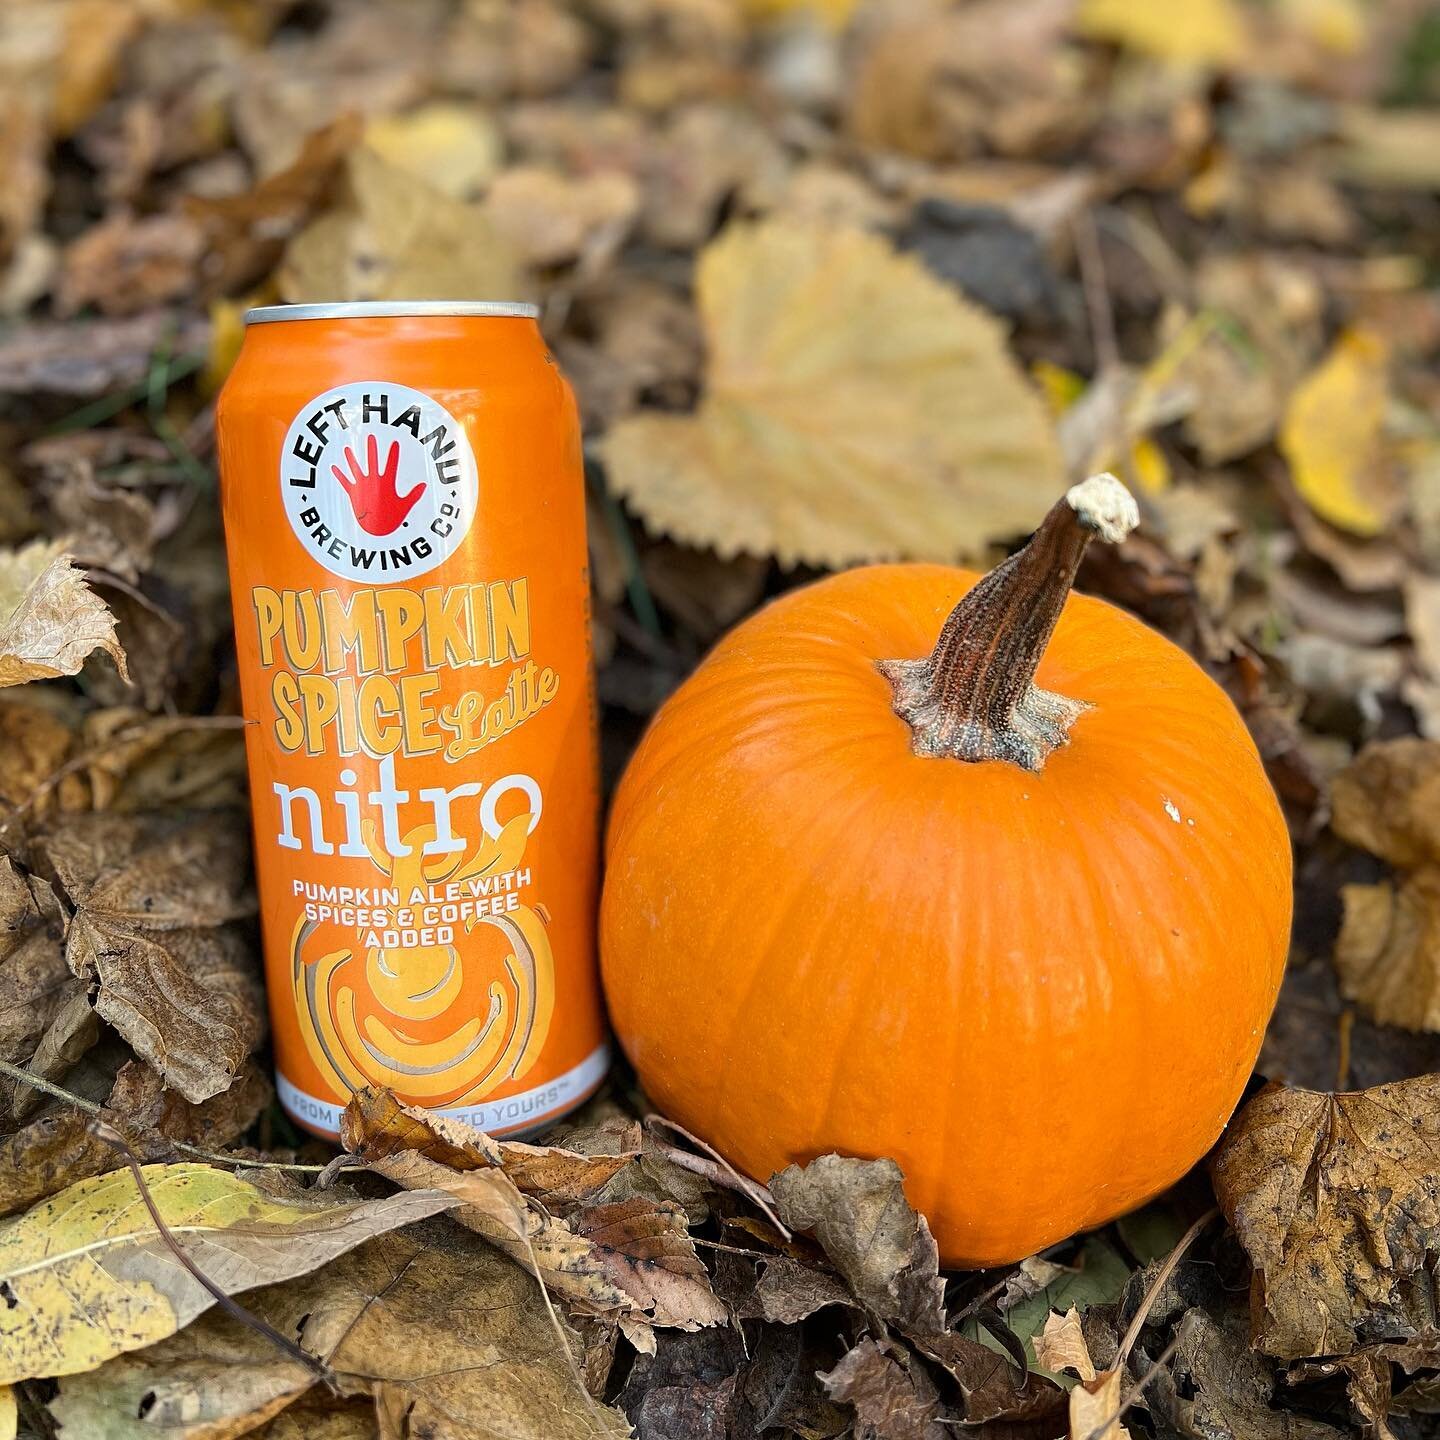 Pumpkin anyone? 🎃 We&rsquo;re gearing up for Halloween the best way we know how - with pumpkin beer! This nitro from @lefthandbrewing is incredibly smooth and would be the perfect spooky brew for the upcoming weekend. 👻